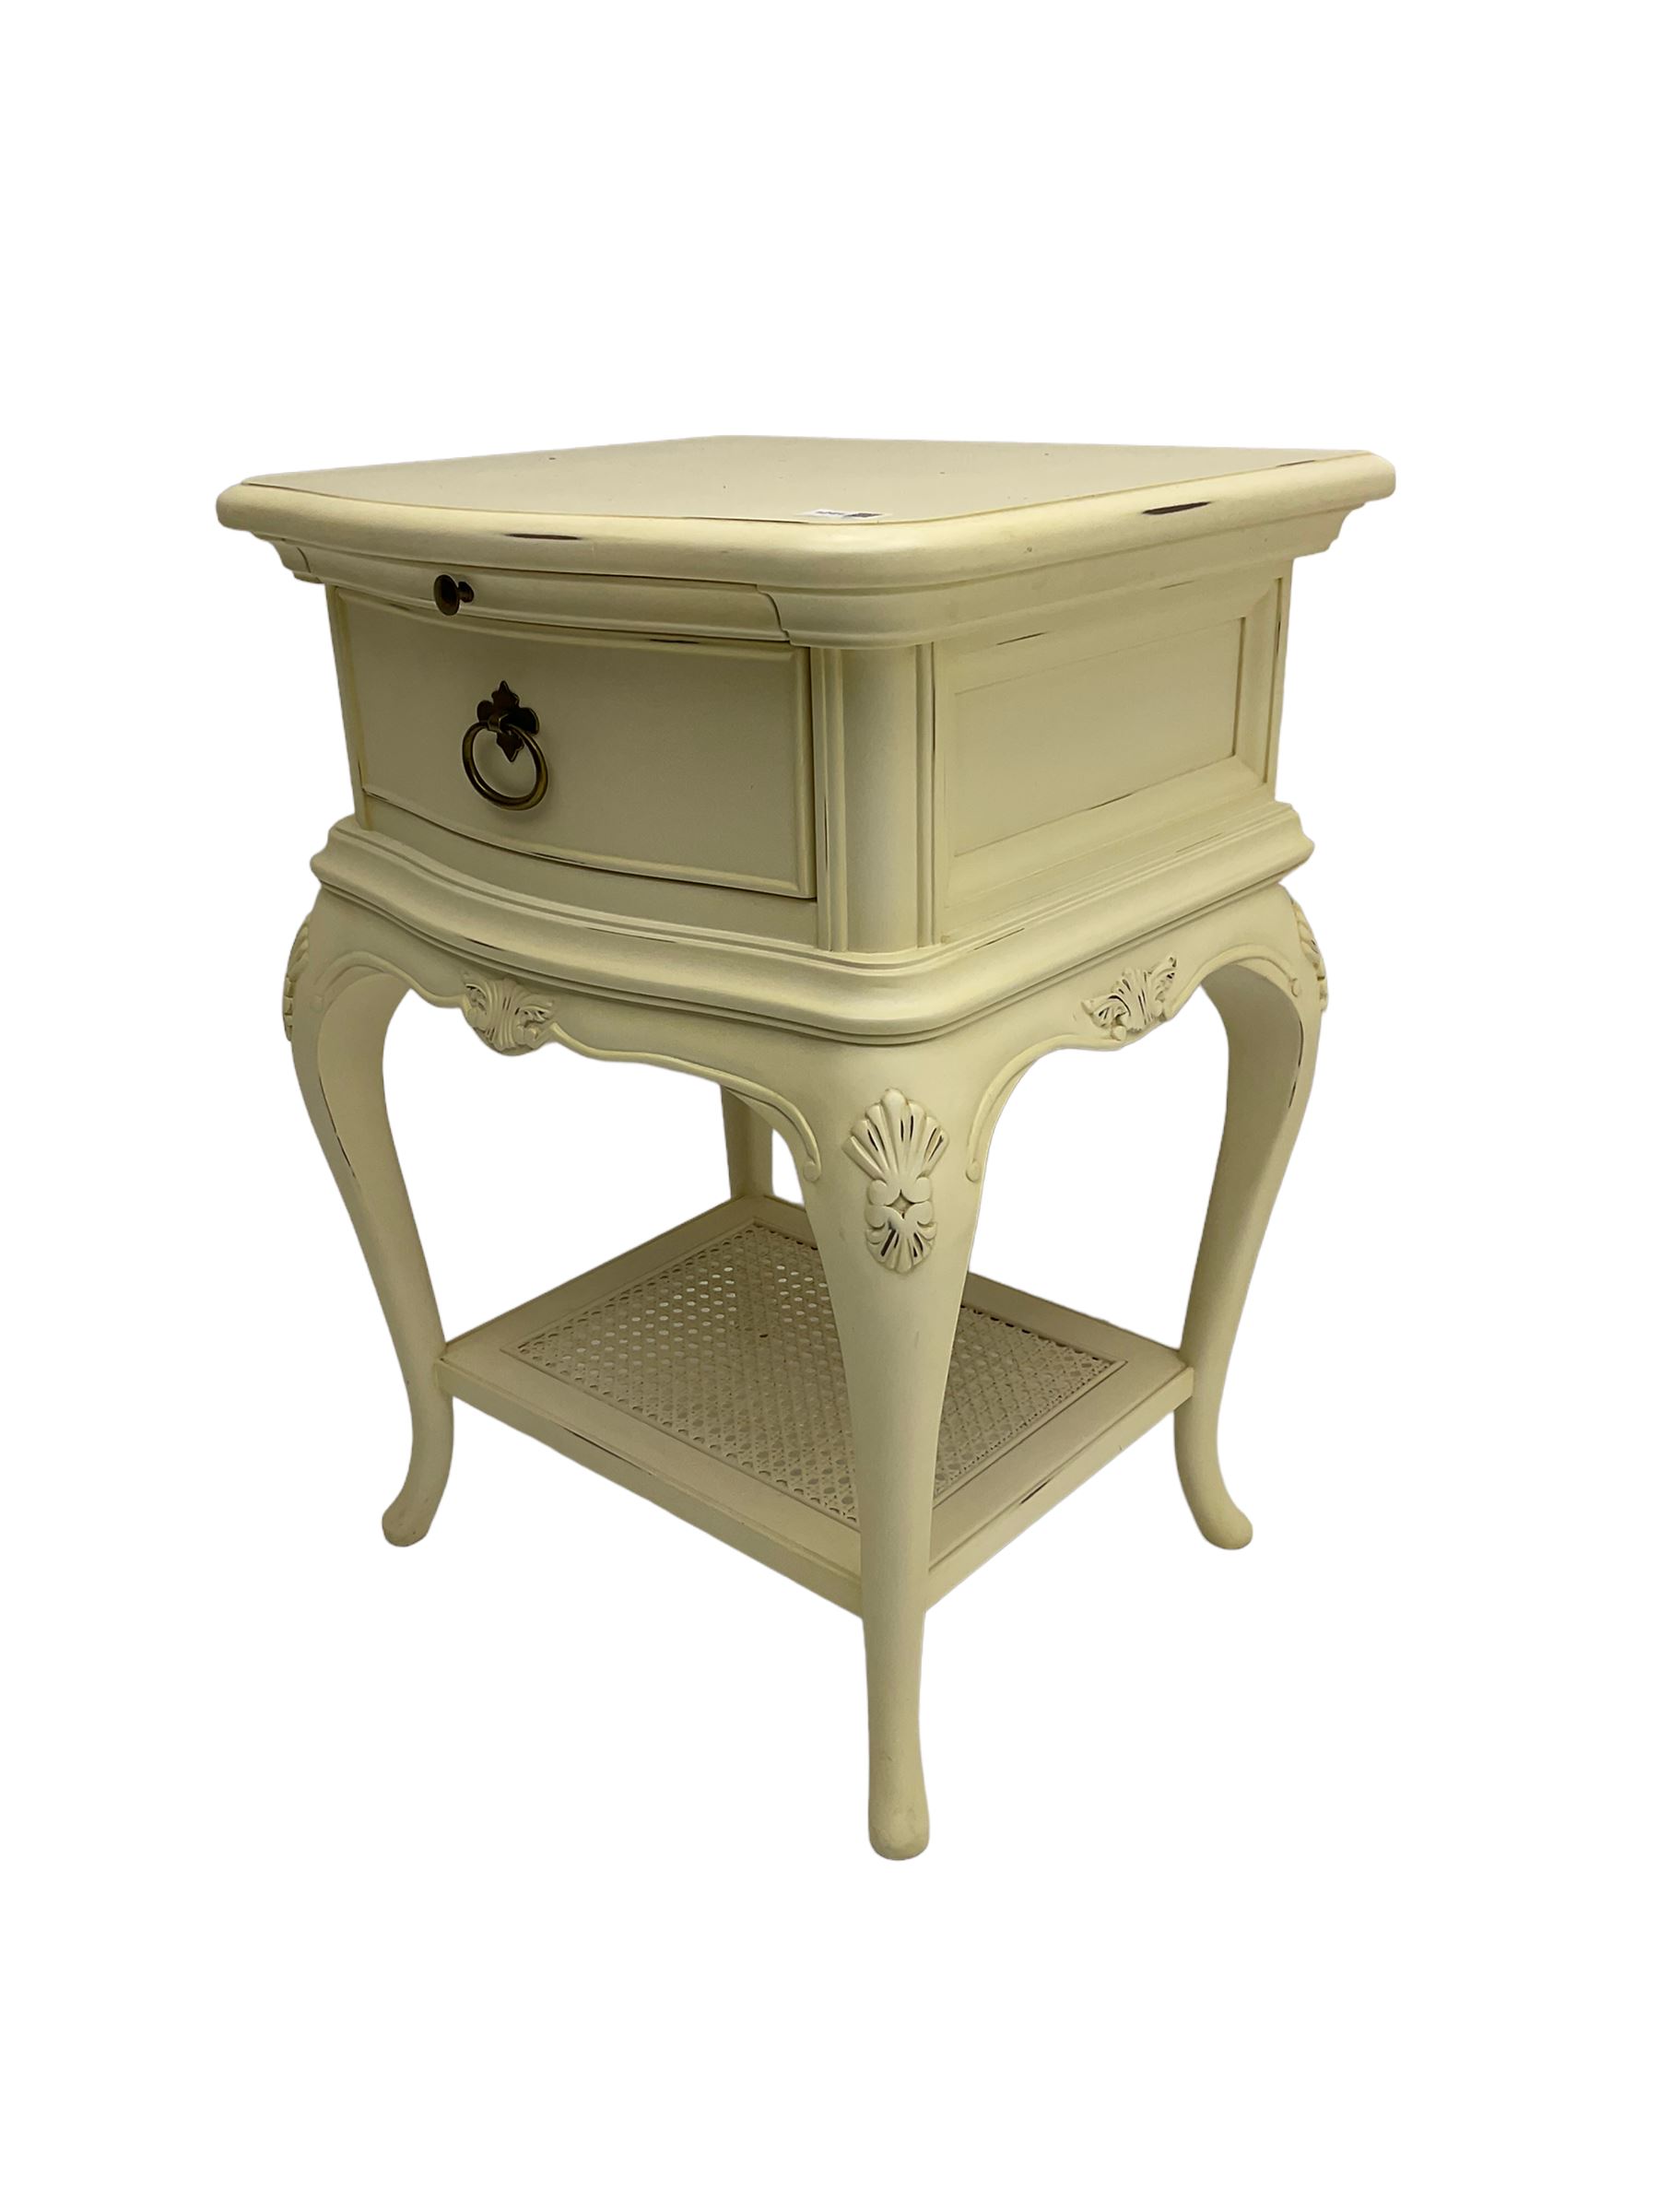 Willis and Gambier - bedside cabinet - Image 4 of 7